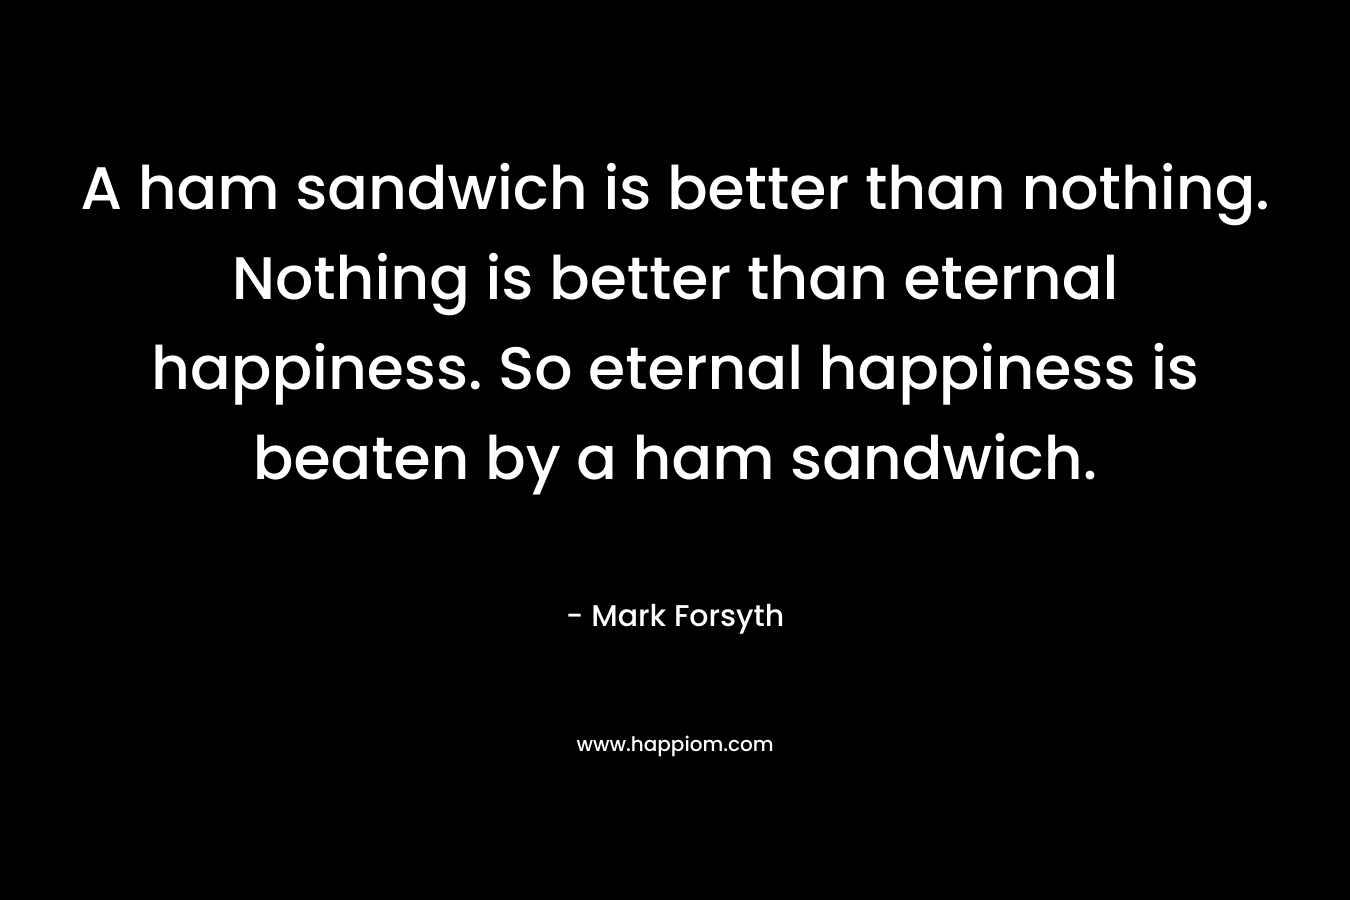 A ham sandwich is better than nothing. Nothing is better than eternal happiness. So eternal happiness is beaten by a ham sandwich. – Mark Forsyth